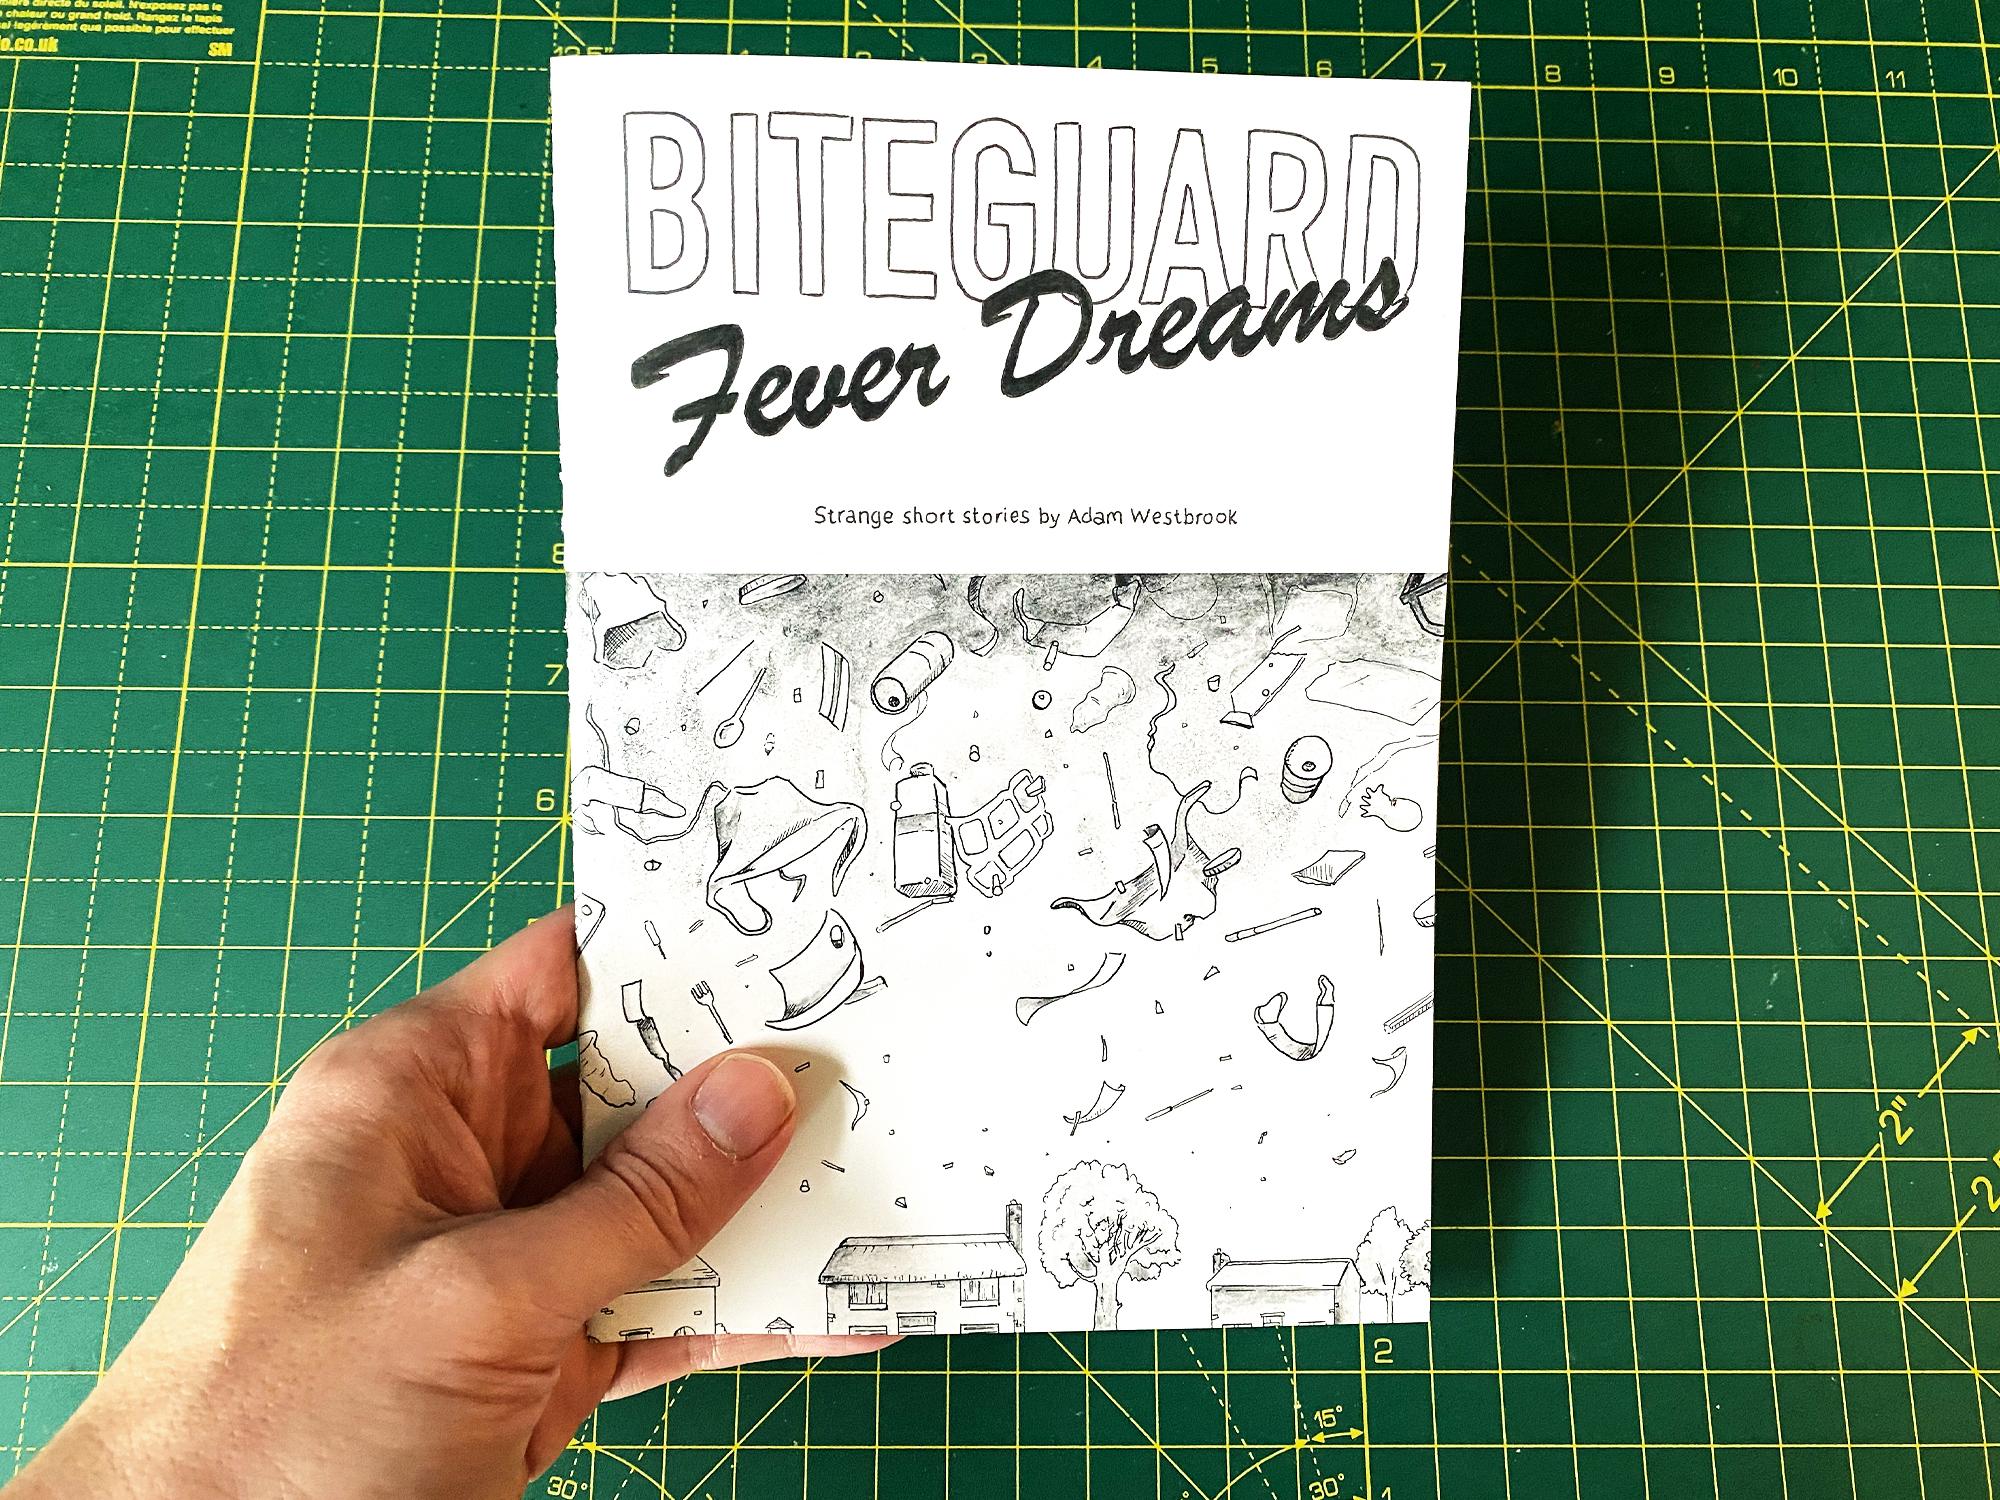 The front cover of Bite Guard Fever Dreams by Adam Westbrook